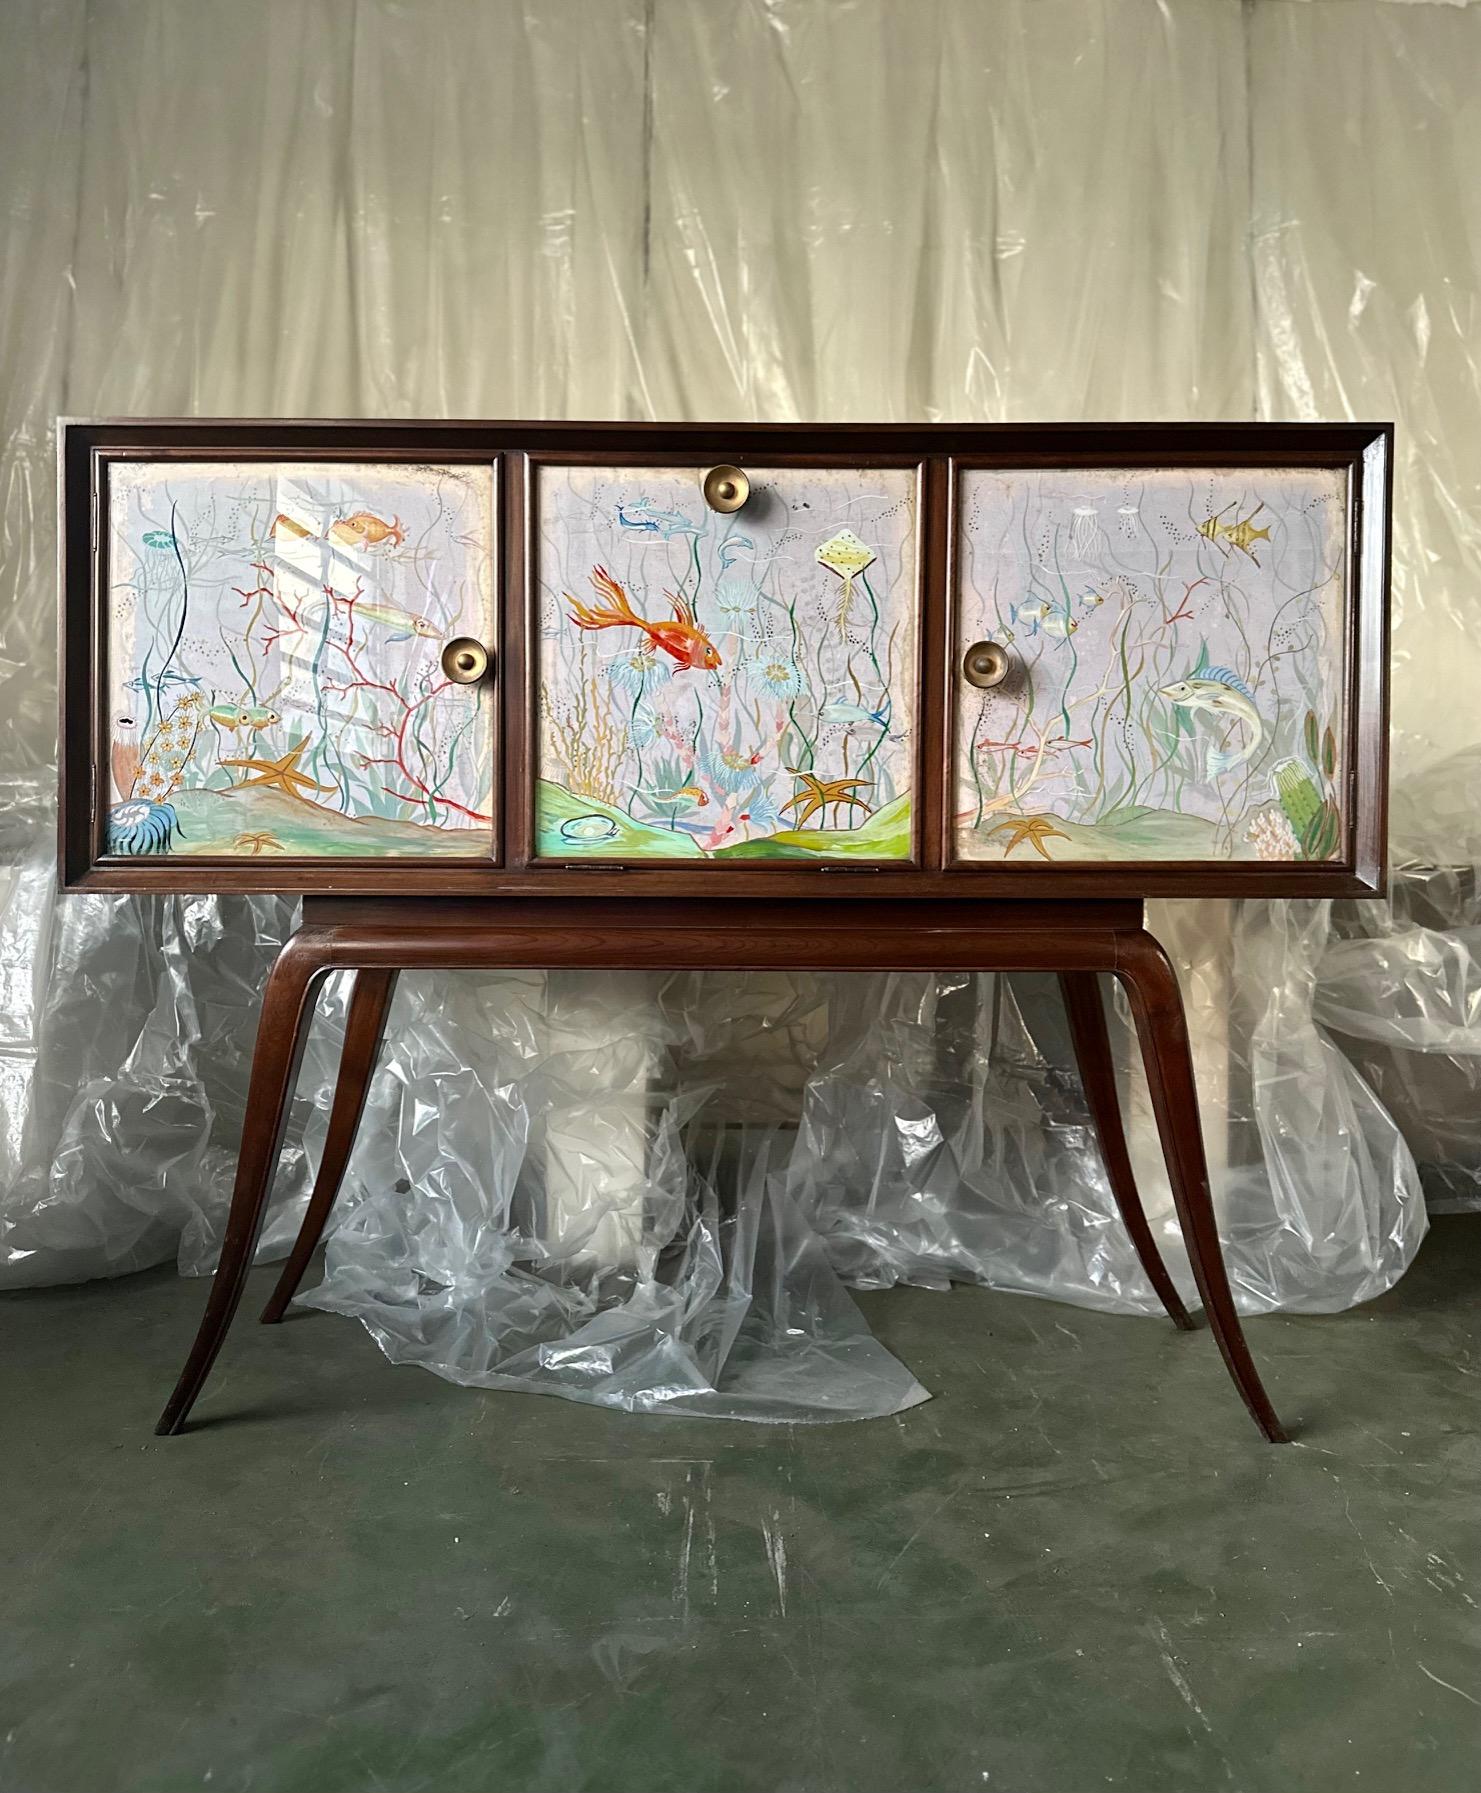 A classic and, at the same time, original sideboard featuring one of a kind underwater themed panels. The paintings showcase the deep sea full of animals and algae over a blue background. This thematic extends over all three drawers with beautiful